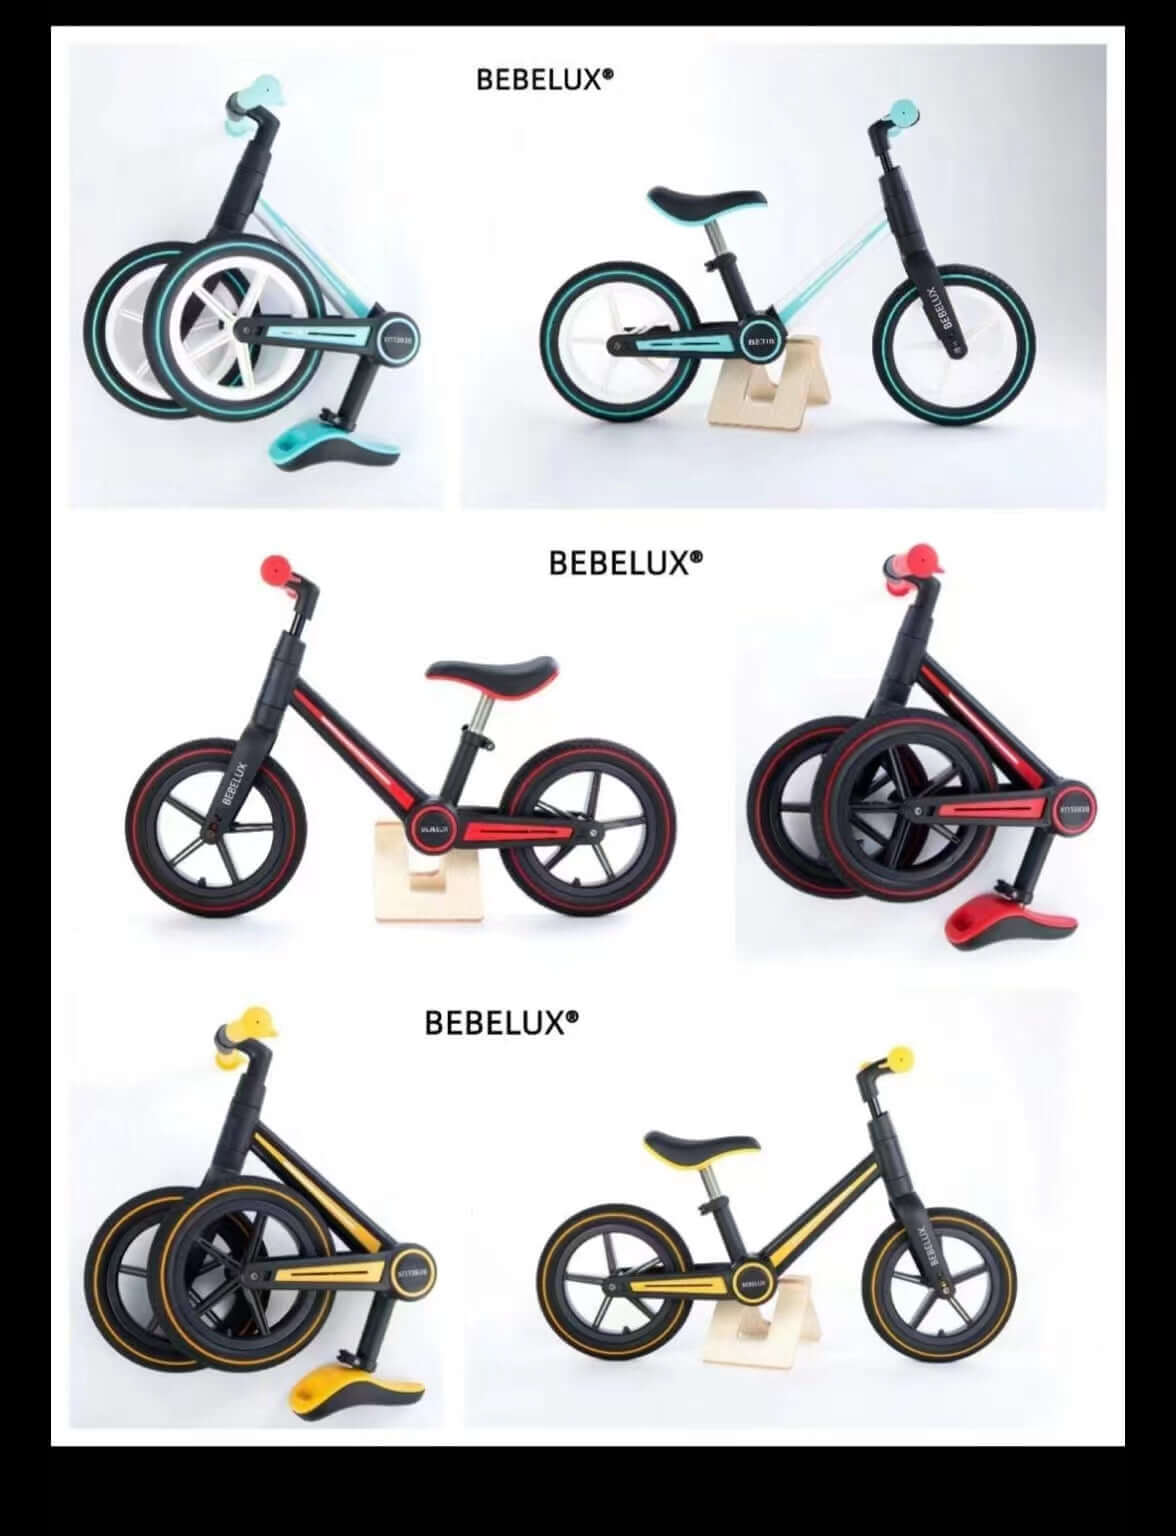 Kidstoylover Foldable Balance Bike for Kids: Durable, Lightweight, and Colorful